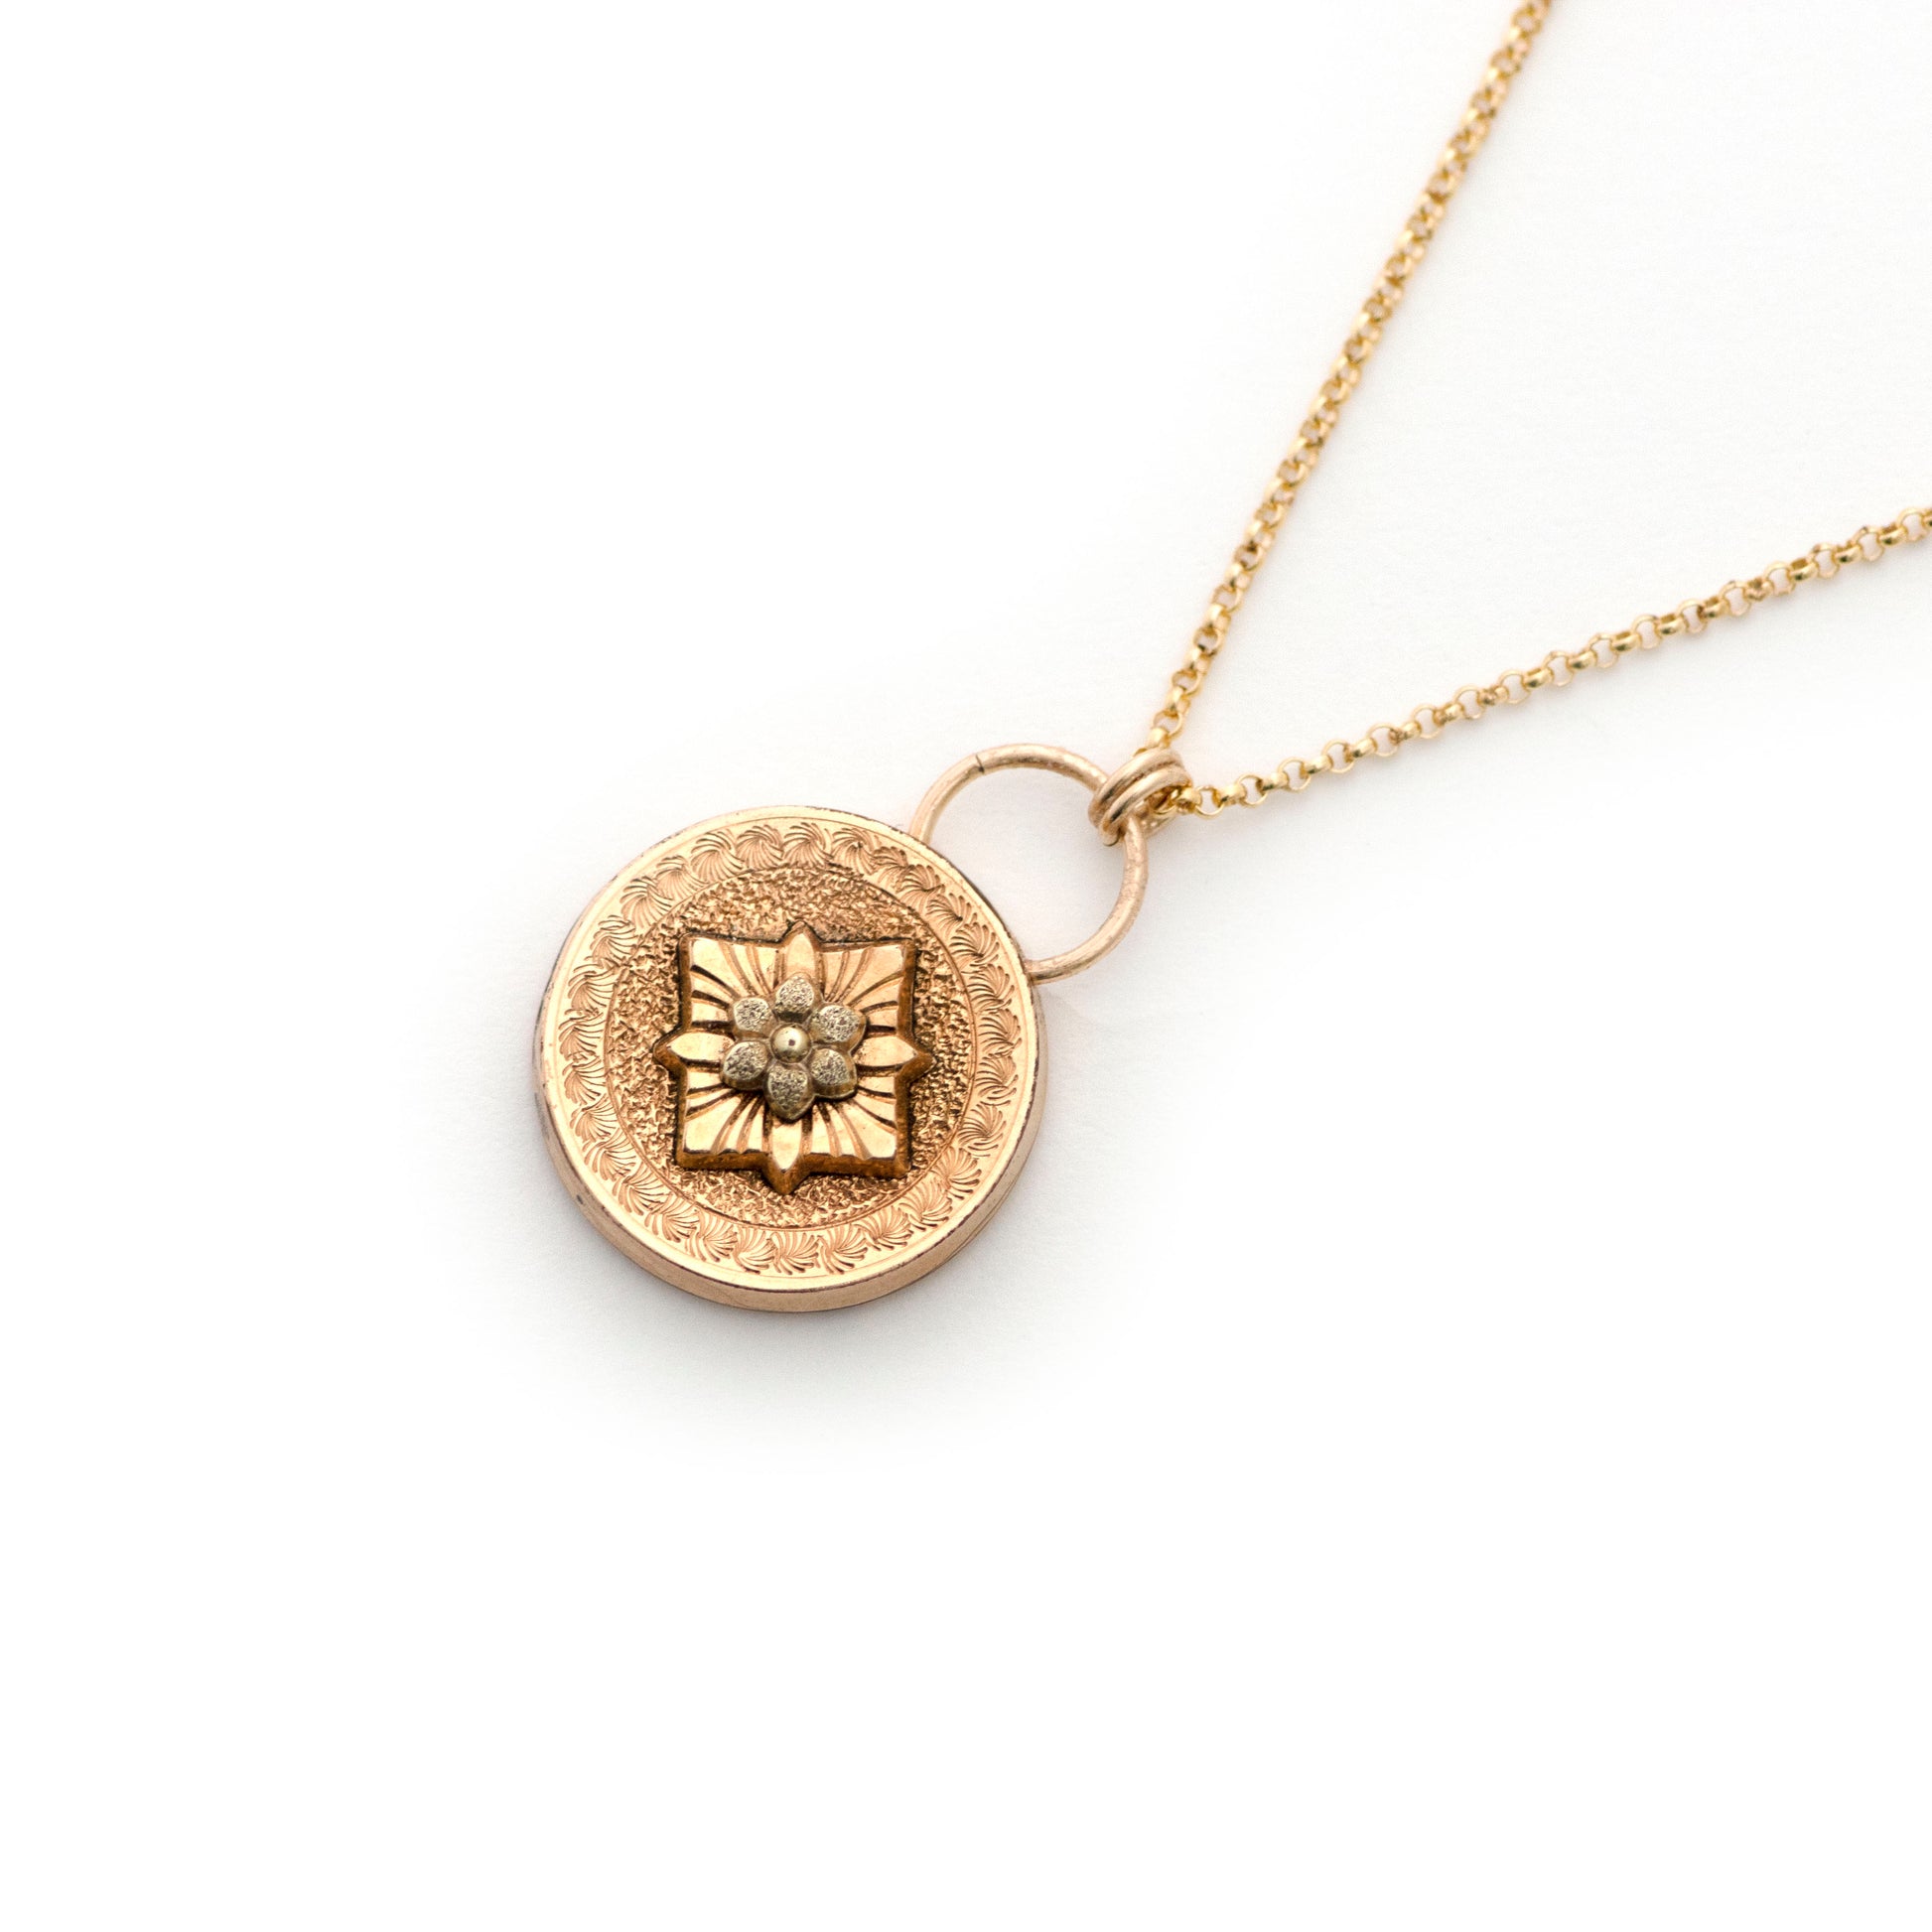 An antique cufflink conversion pendant resembling a door knocker shape that is strung on a 14k gold filled chain and laying on an all white background.